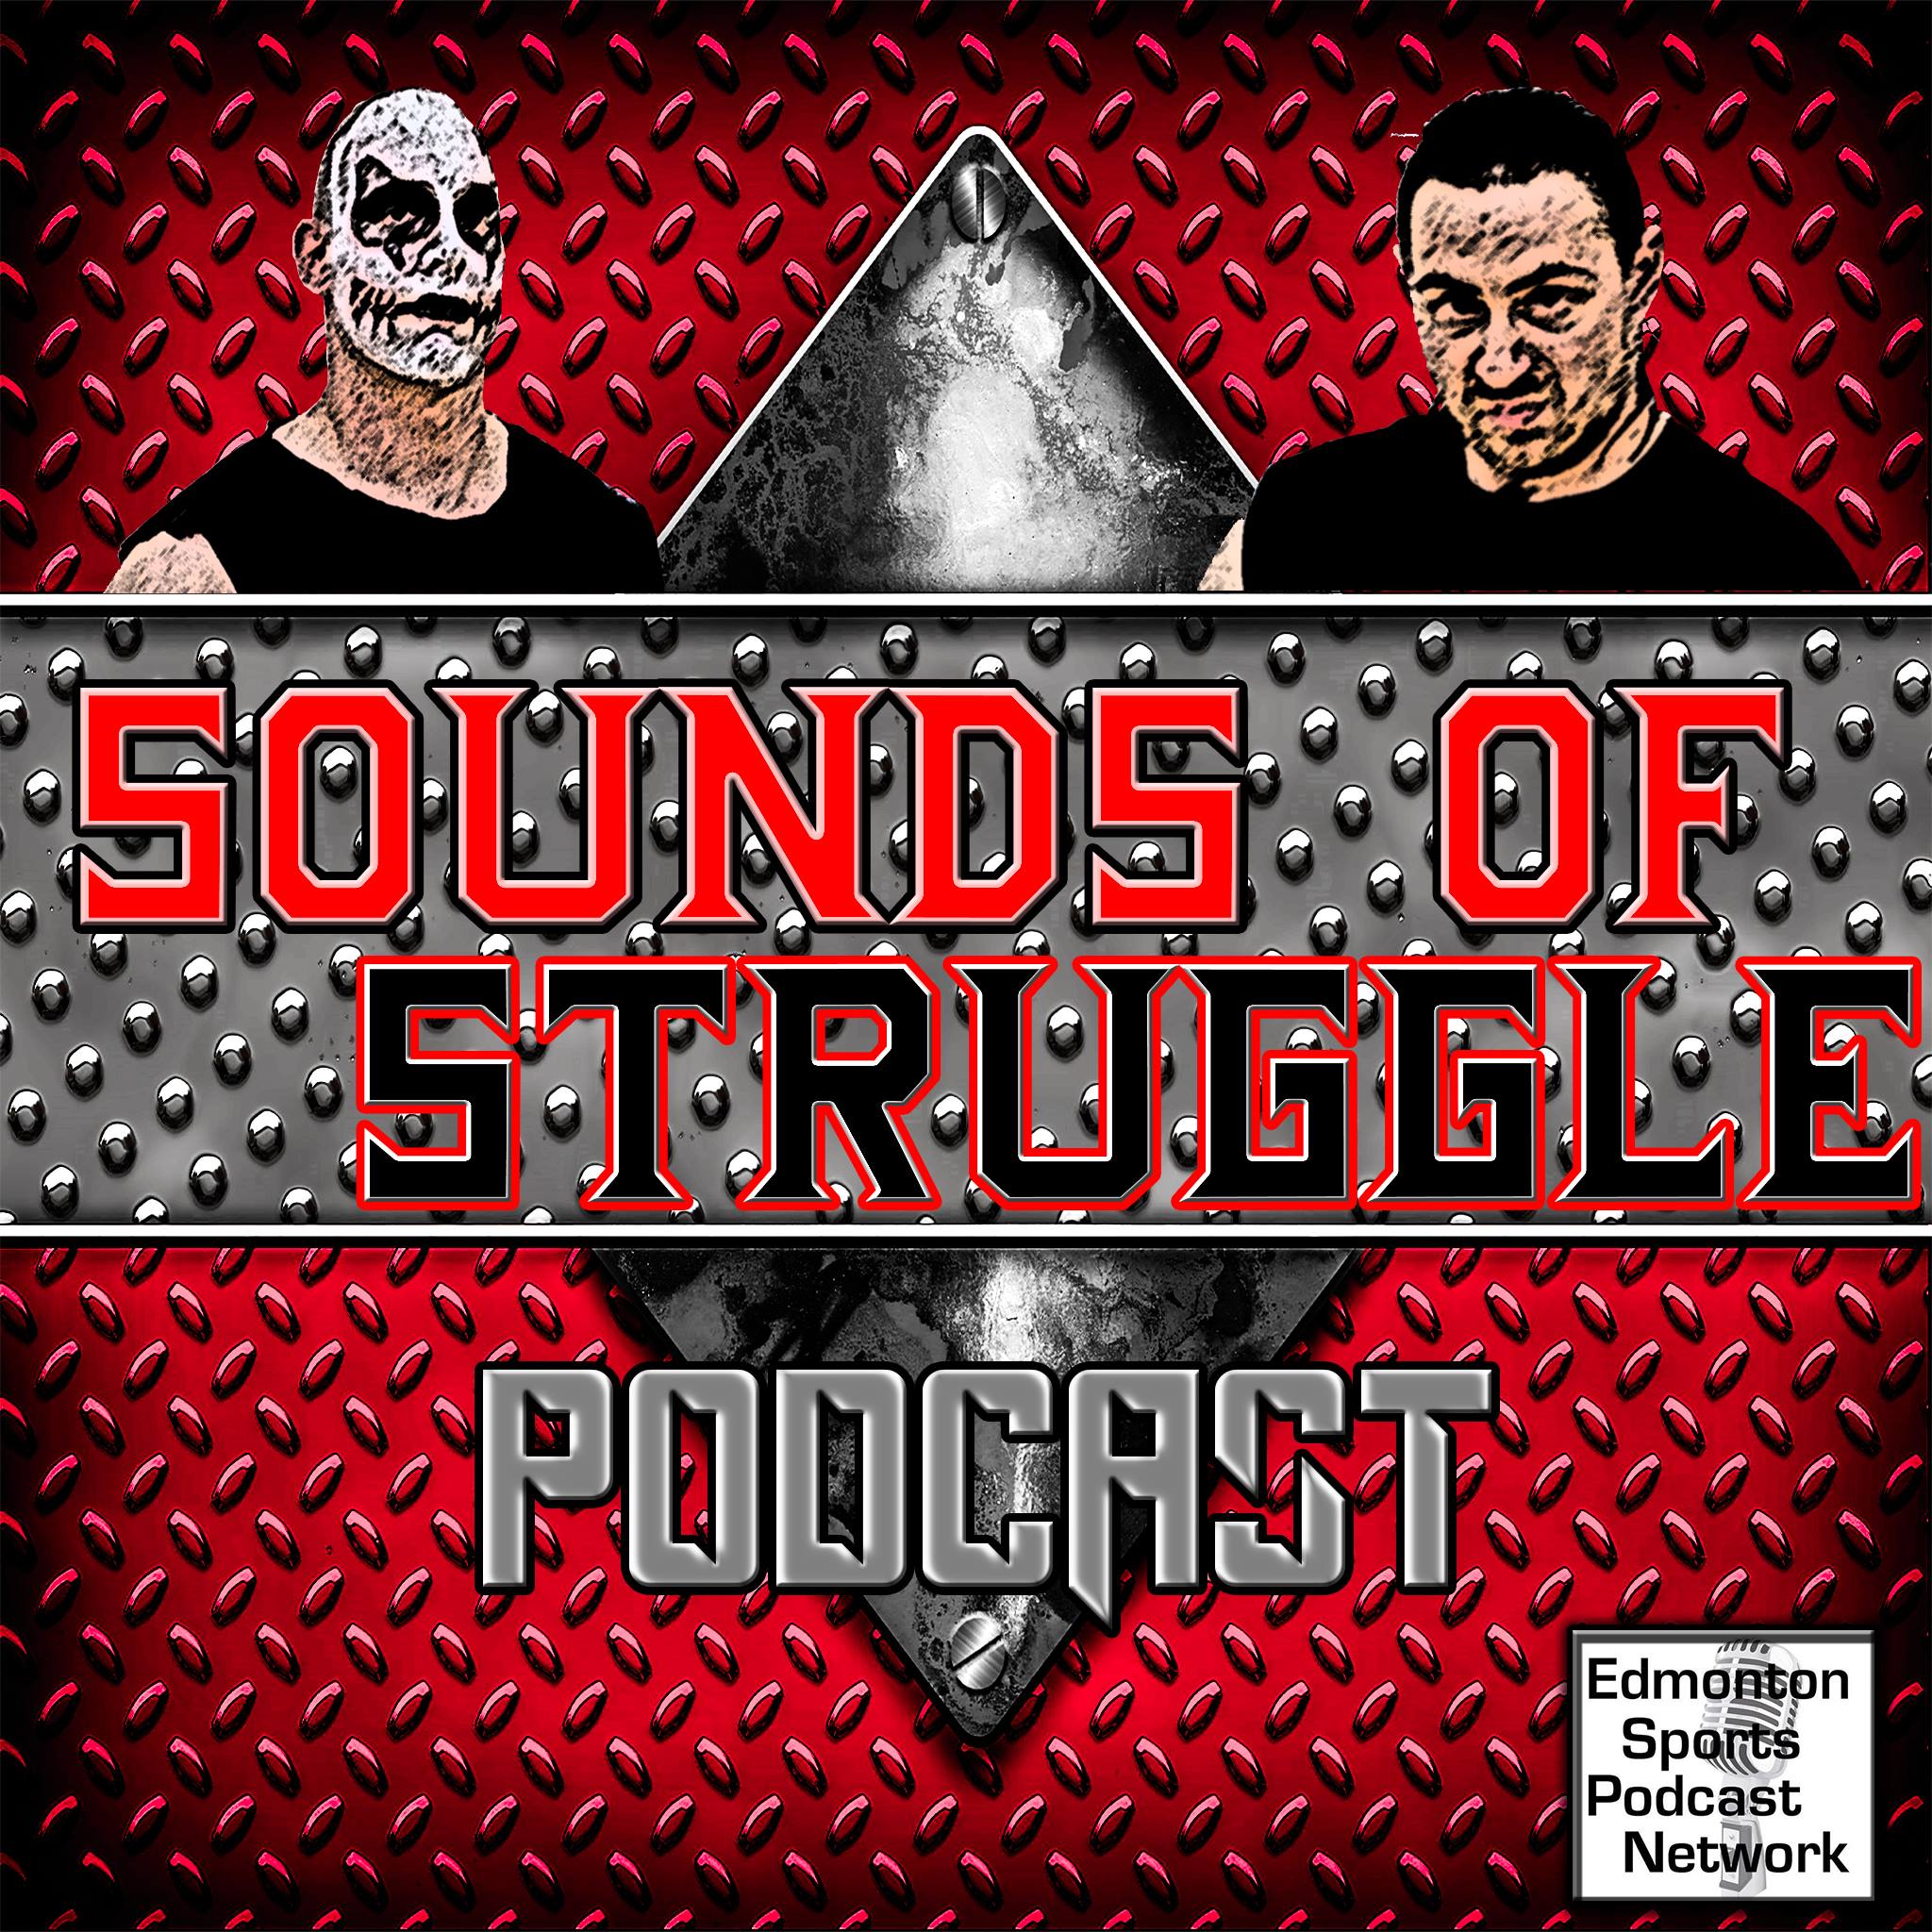 Sounds of Struggle Episode 15 - Yes we're going there!!!